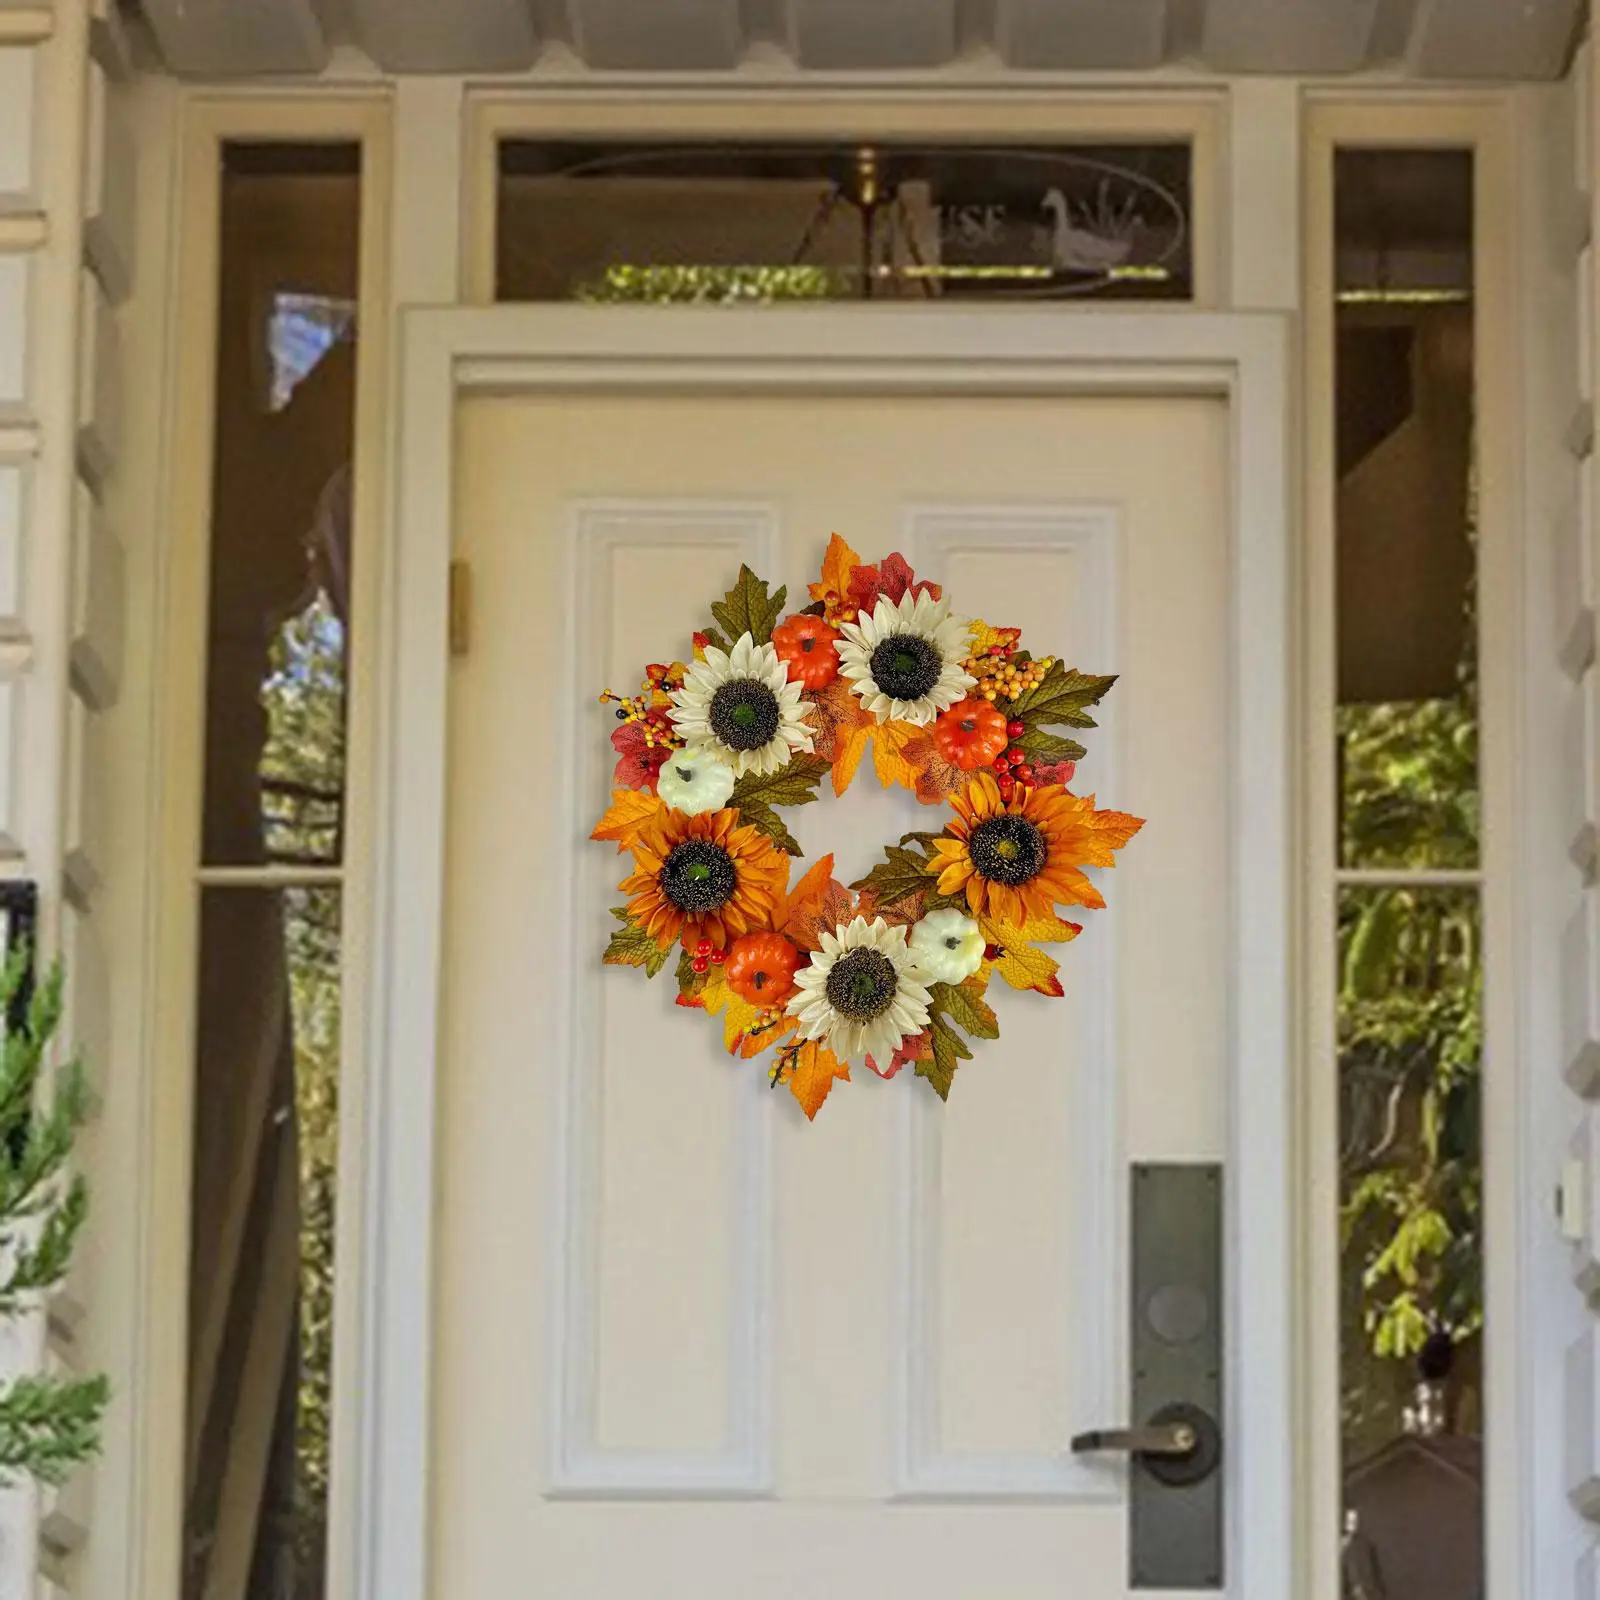 Farmhouse Garland Hanging Door Wreath Decorative Harvest Fall Wreath for Front Door Outdoor Fireplace Festival Wall